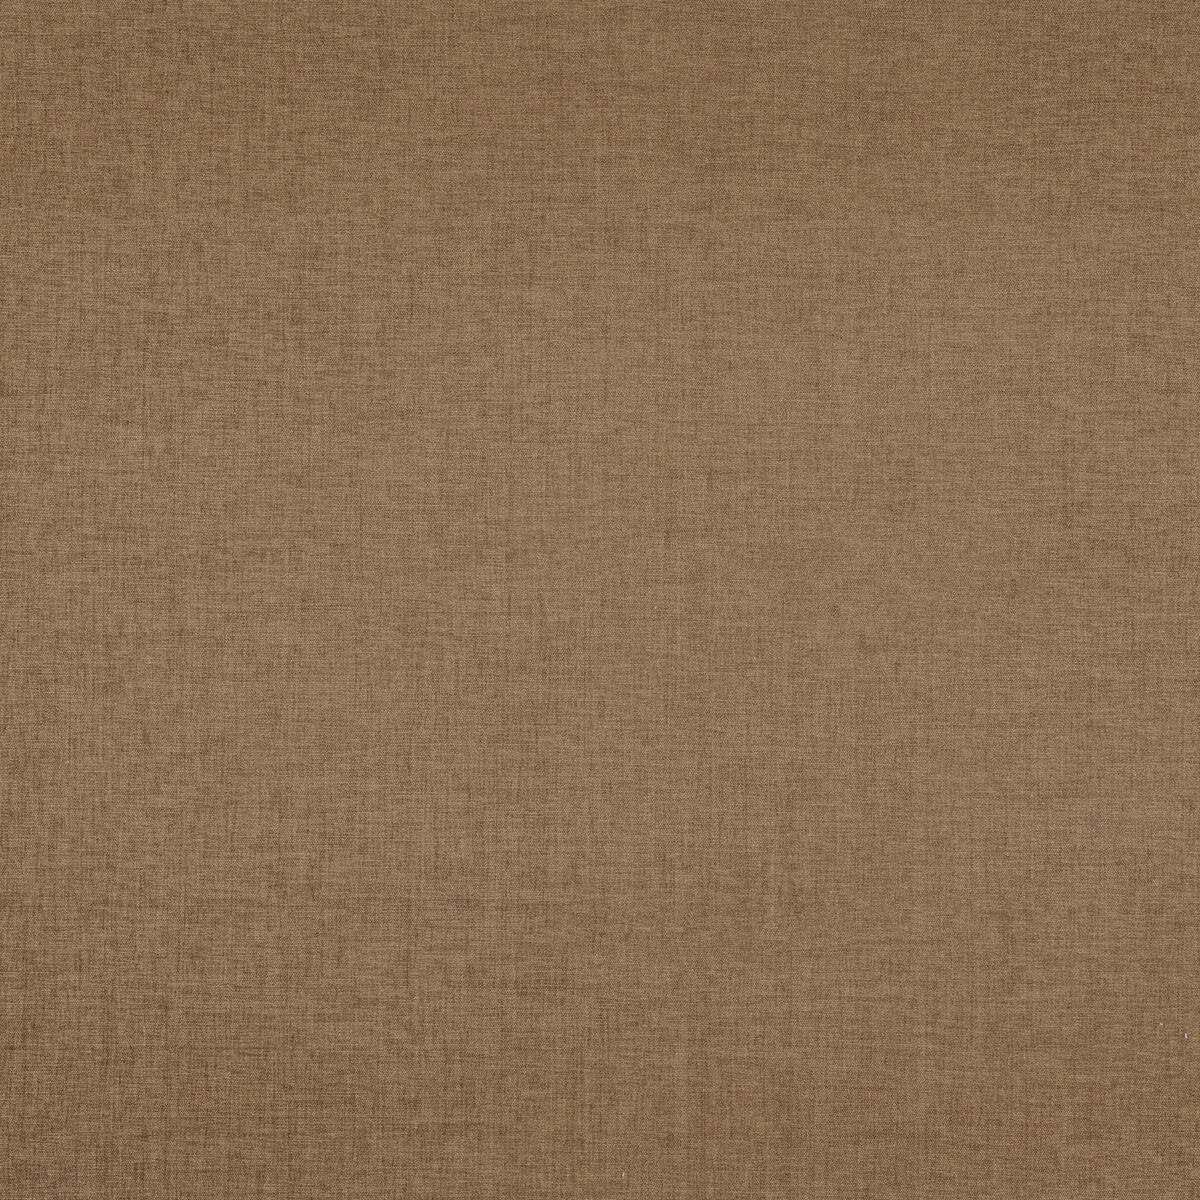 Kravet Smart fabric in 36095-616 color - pattern 36095.616.0 - by Kravet Smart in the Eco-Friendly Chenille collection